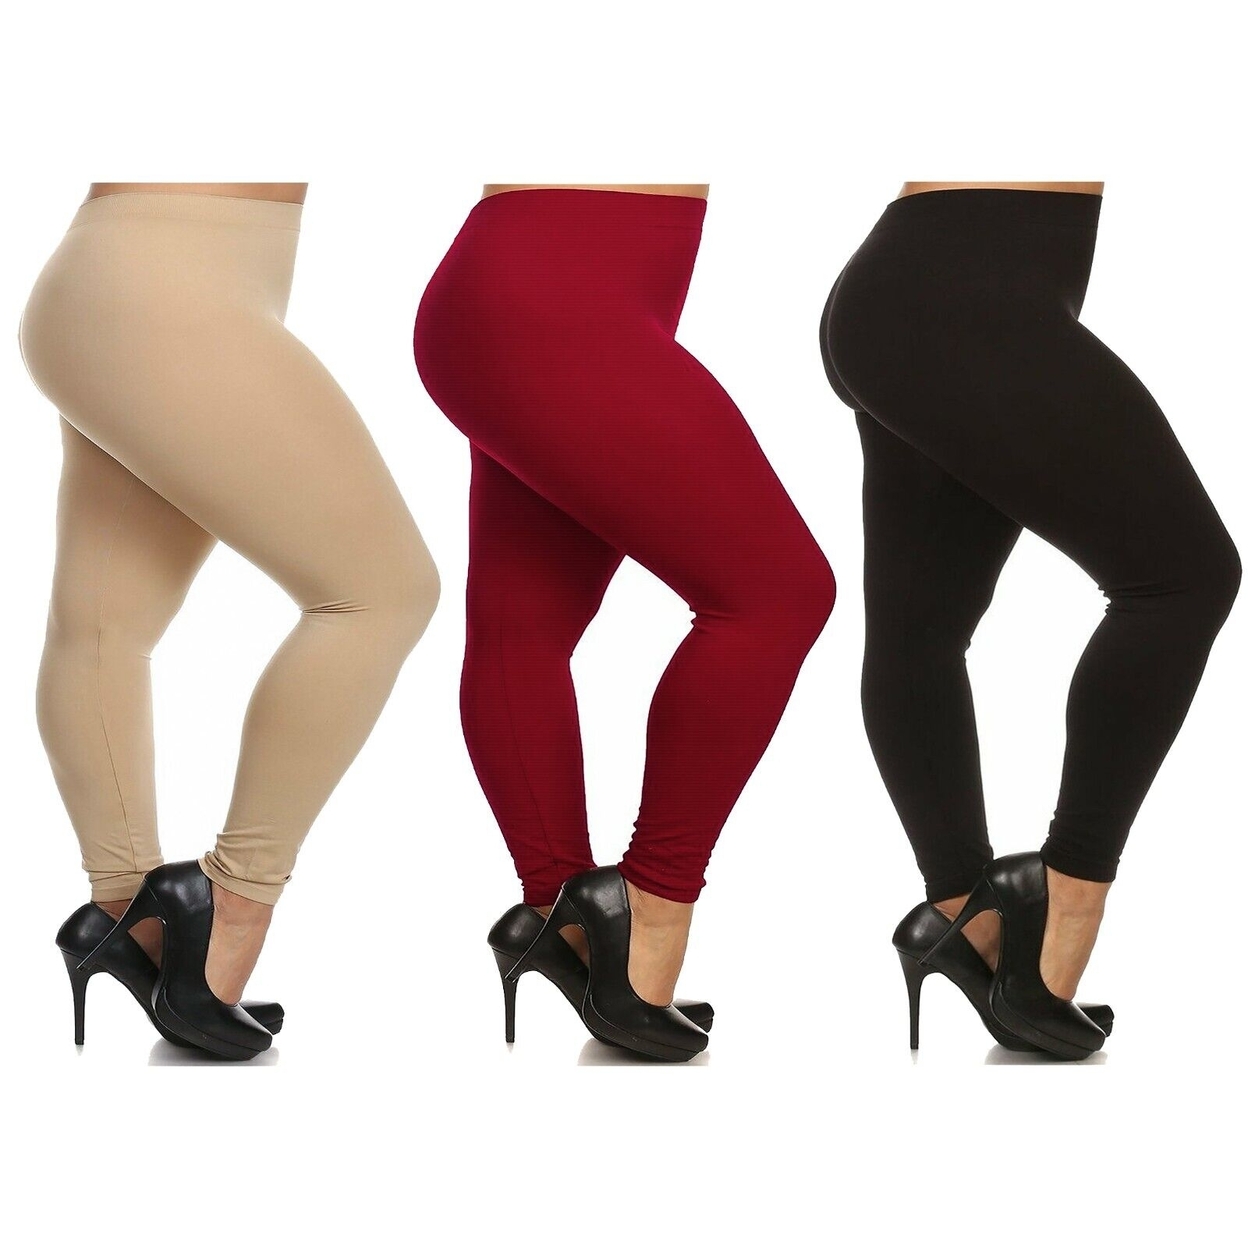 Women's Casual Ultra Soft Smooth High Waisted Athletic Active Yoga Leggings Plus Size Available - Red, 1x